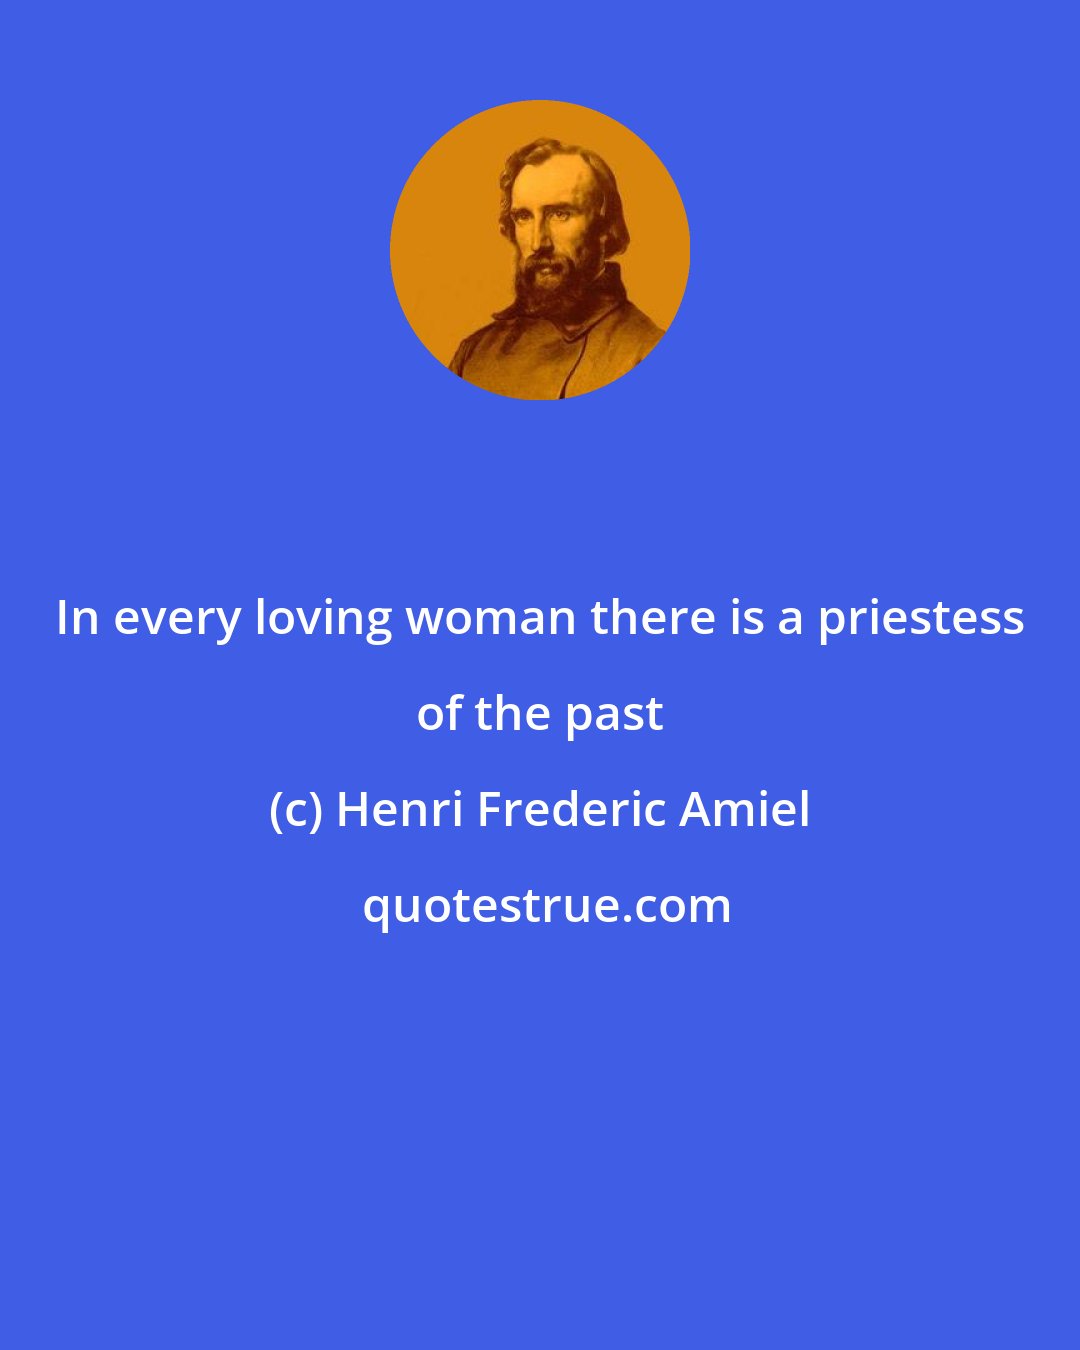 Henri Frederic Amiel: In every loving woman there is a priestess of the past